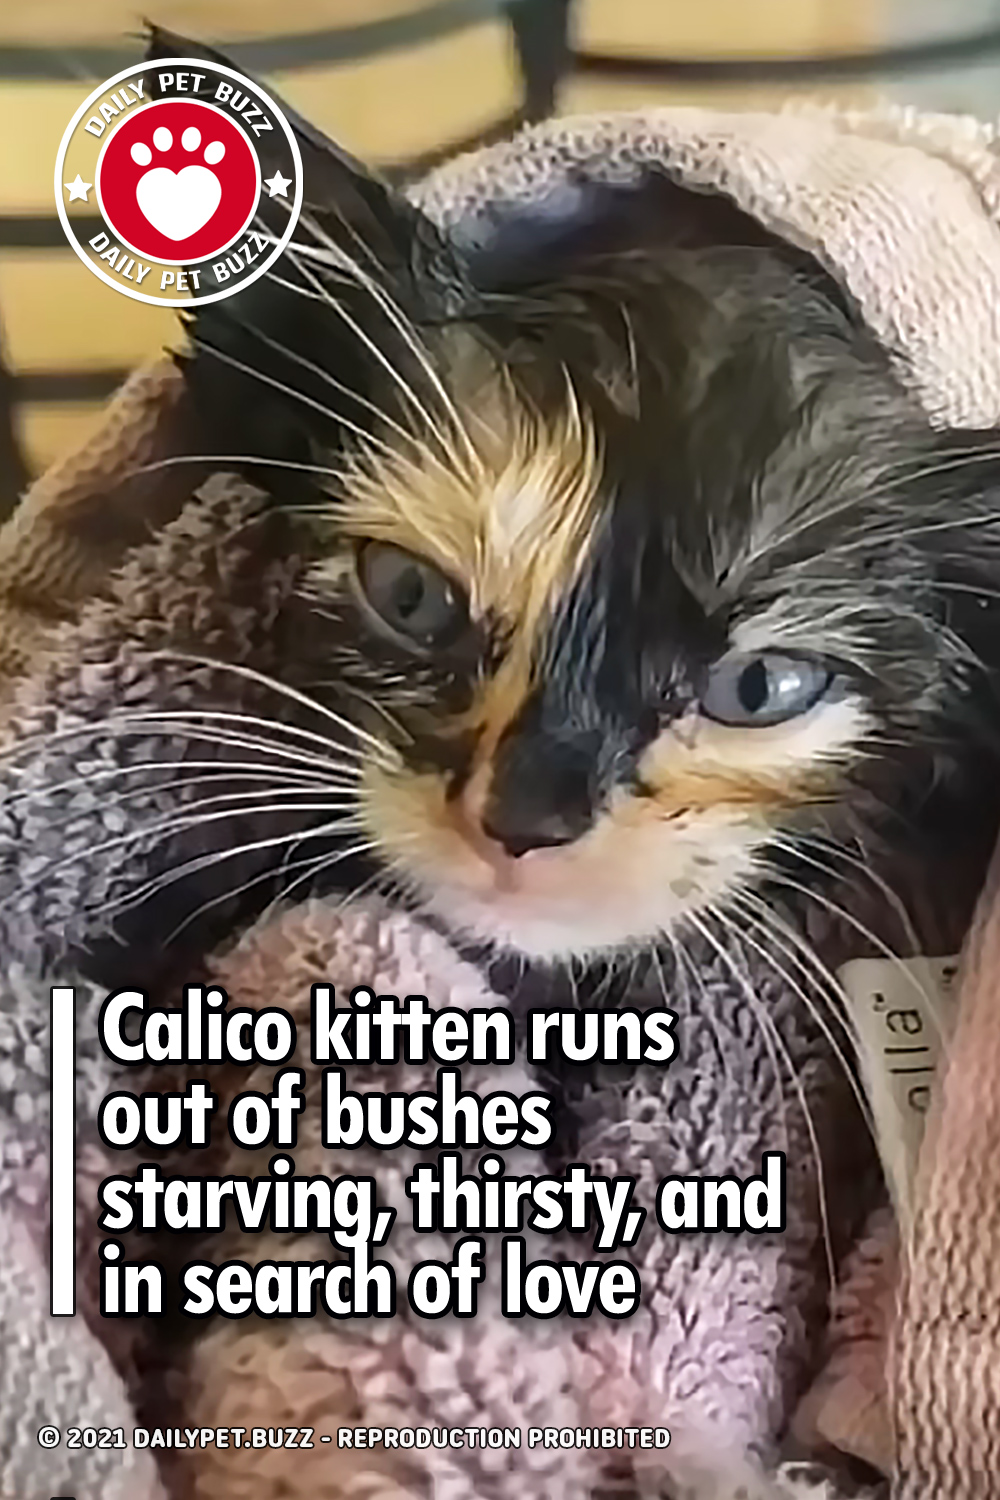 Calico kitten runs out of bushes starving, thirsty, and in search of love